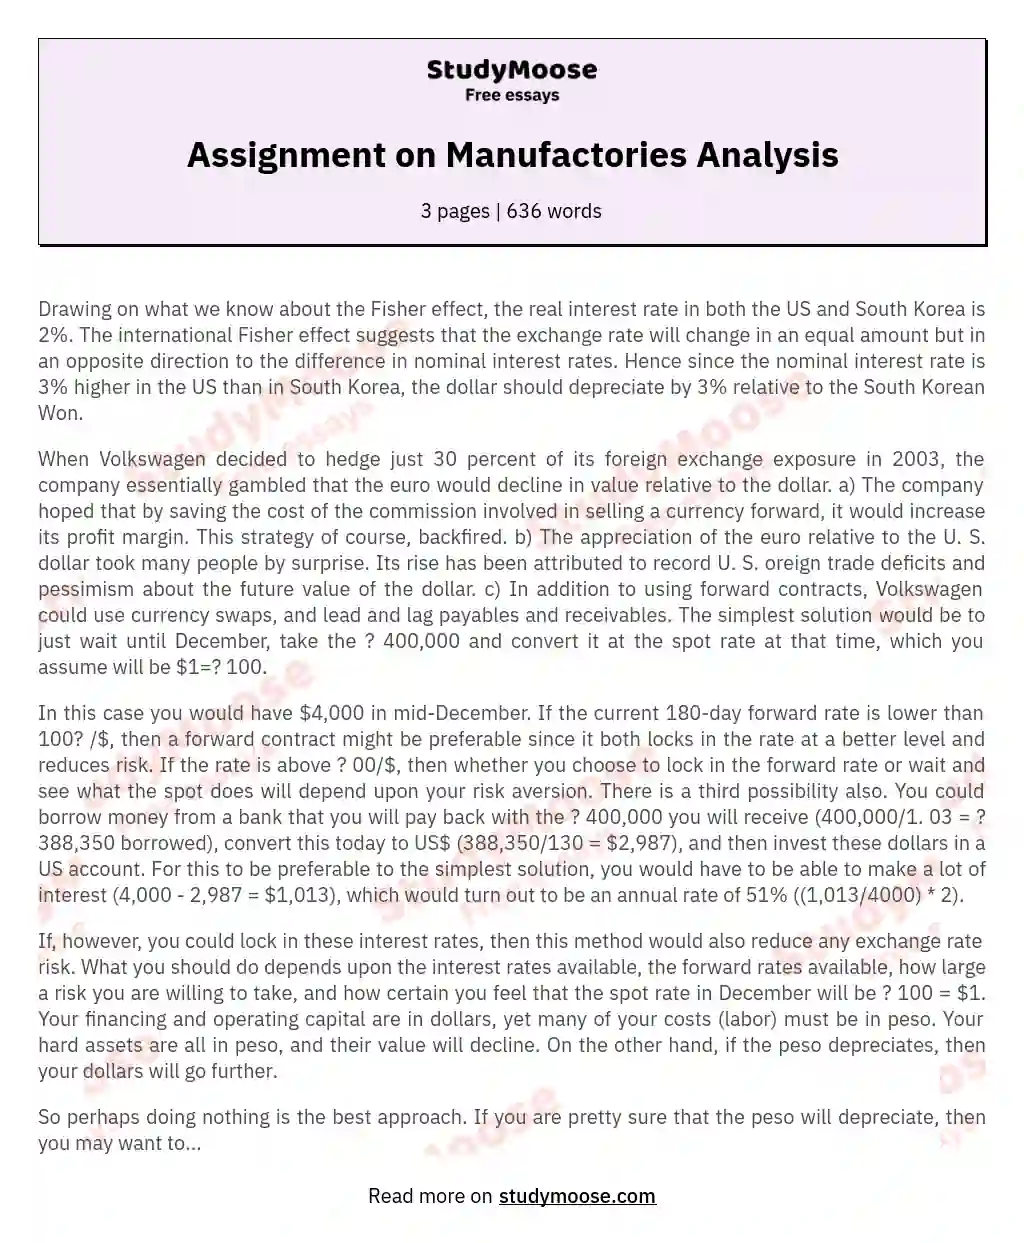 Assignment on Manufactories Analysis essay